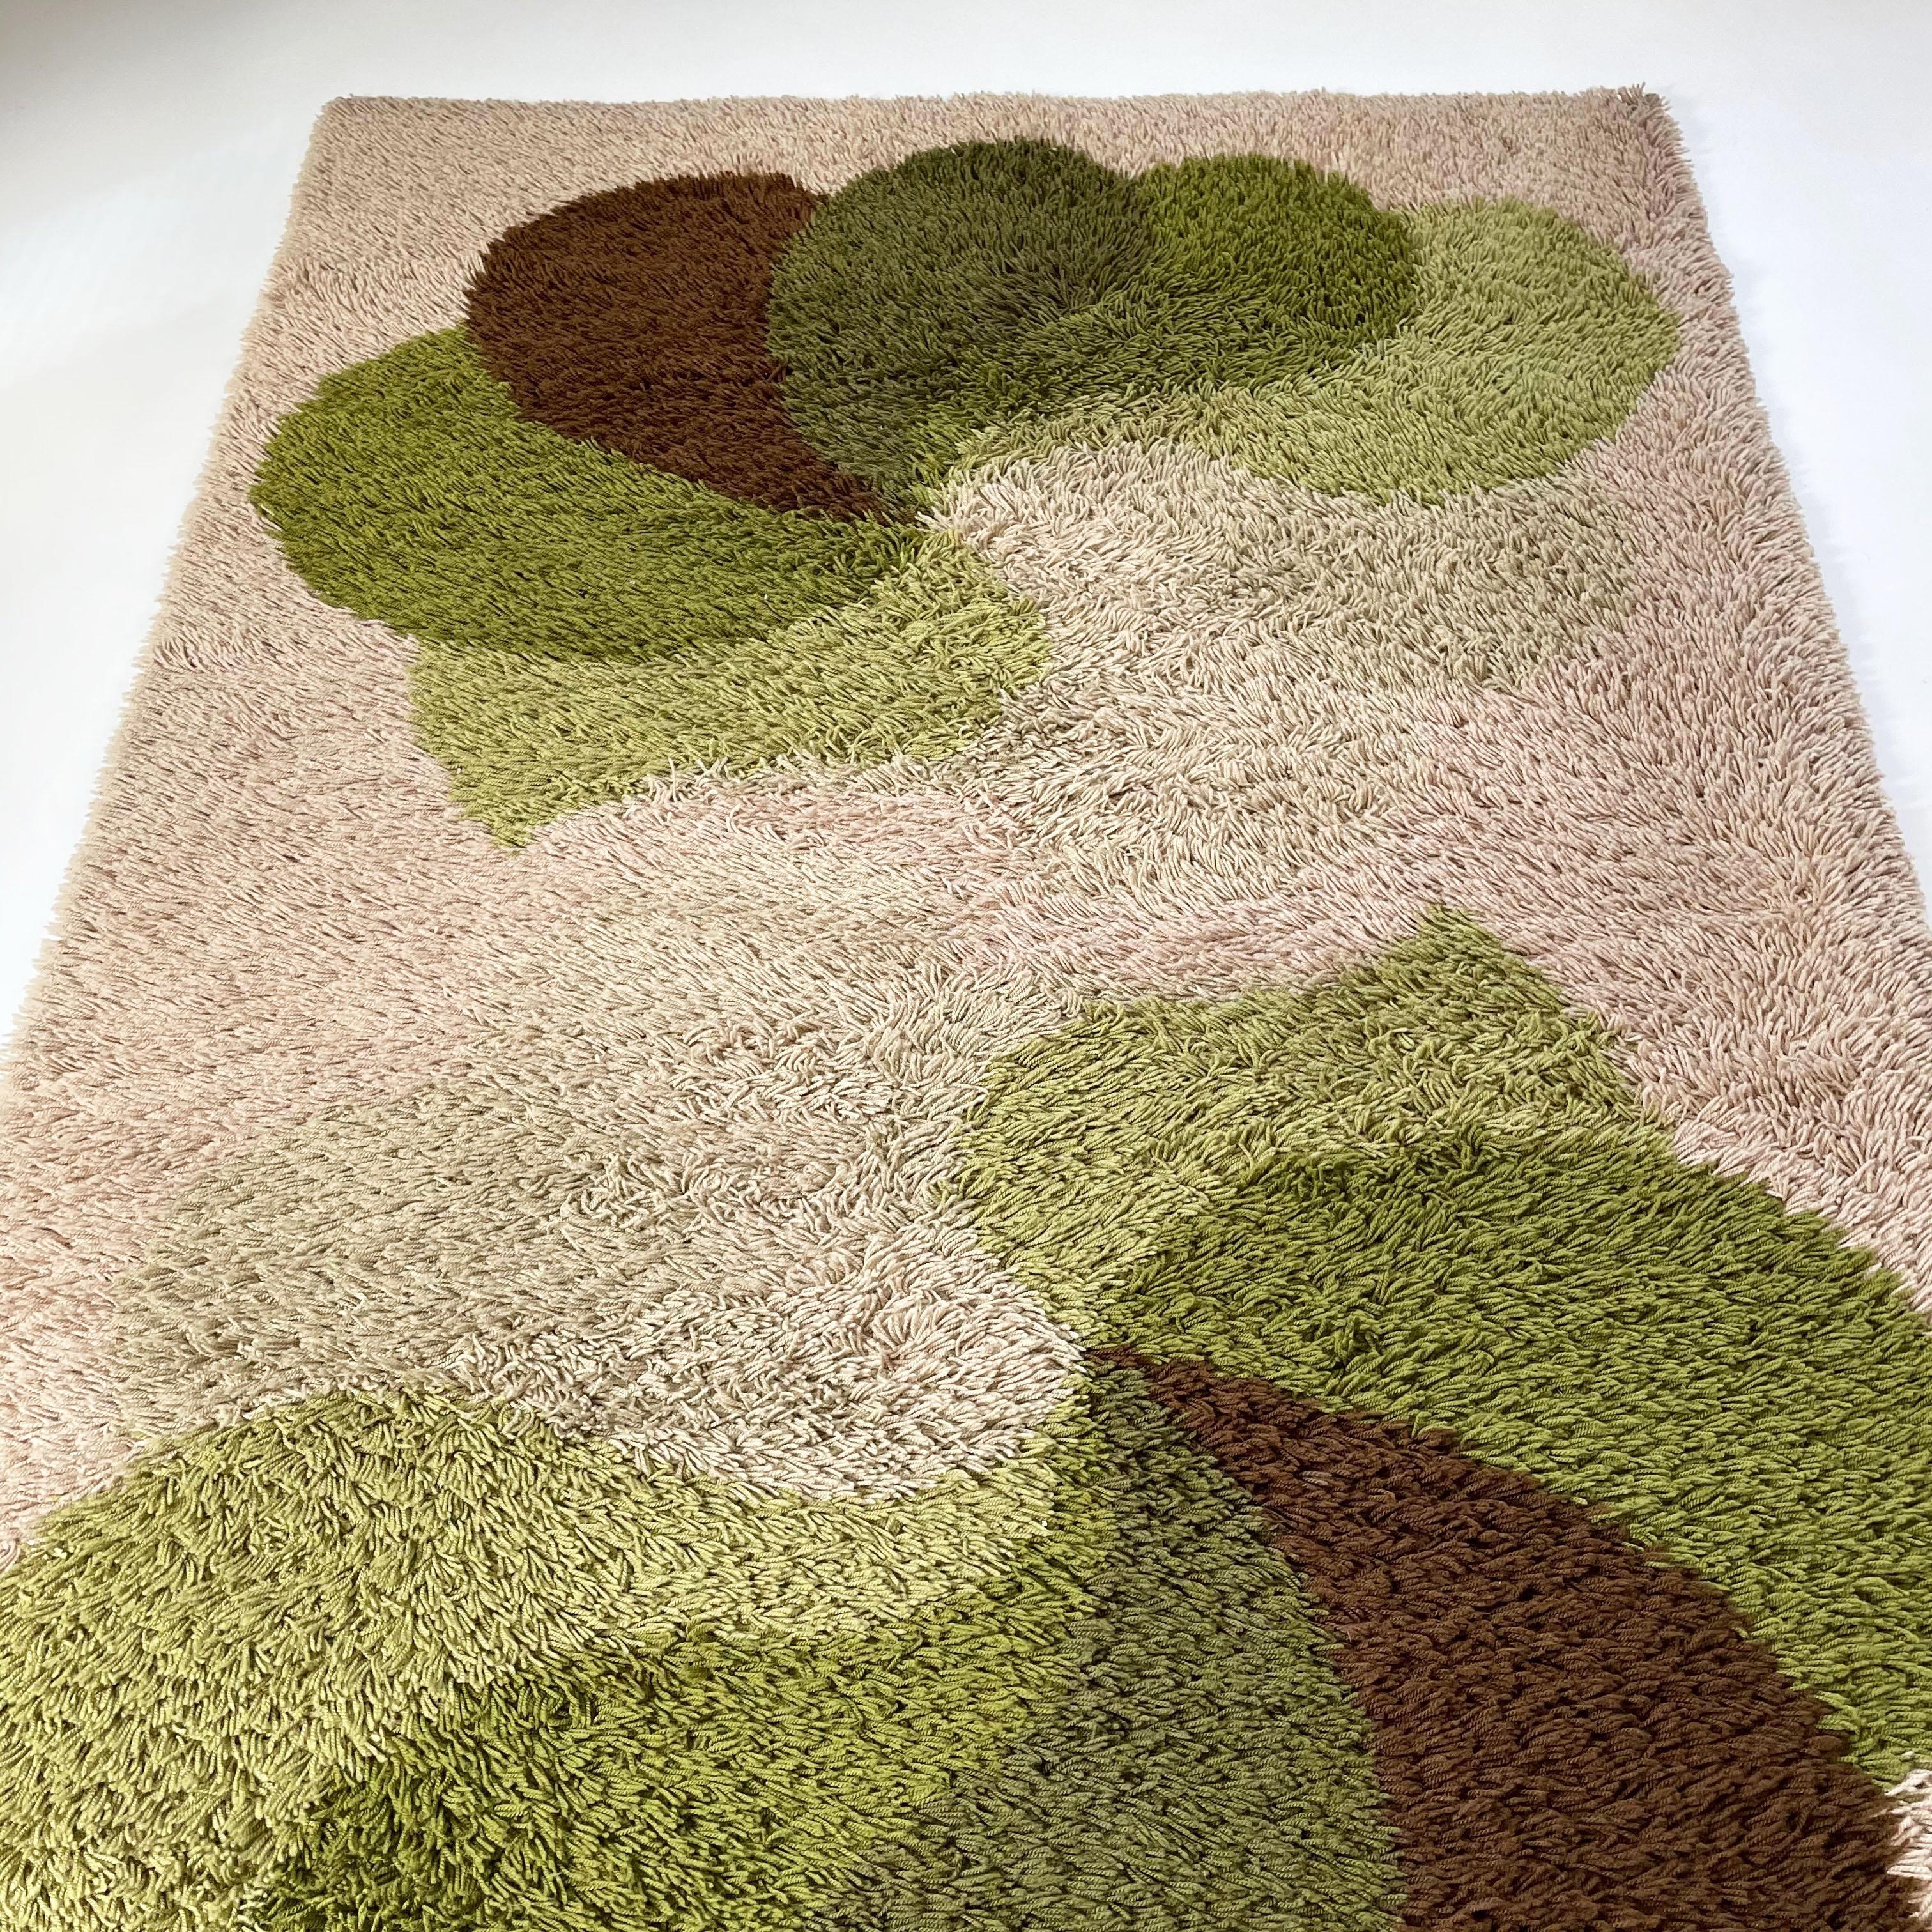 Large Panton Style Multi-Color High Pile Rya Rug by Desso Netherlands, 1970s For Sale 2